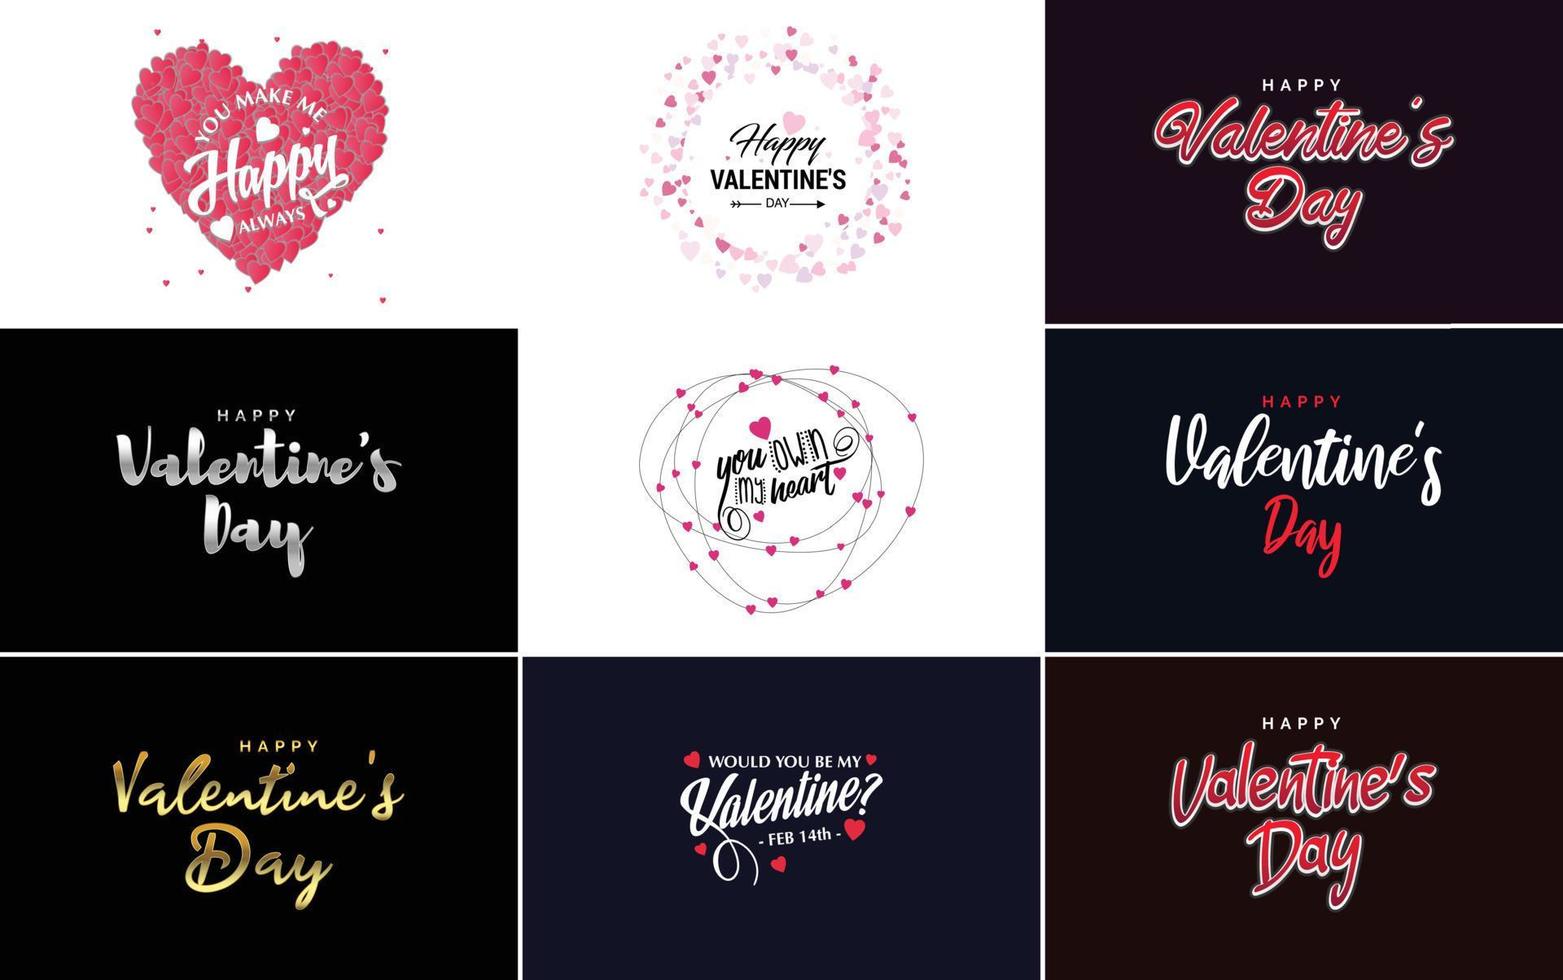 Happy Valentine's Day greeting card template with a romantic theme and a red color scheme vector